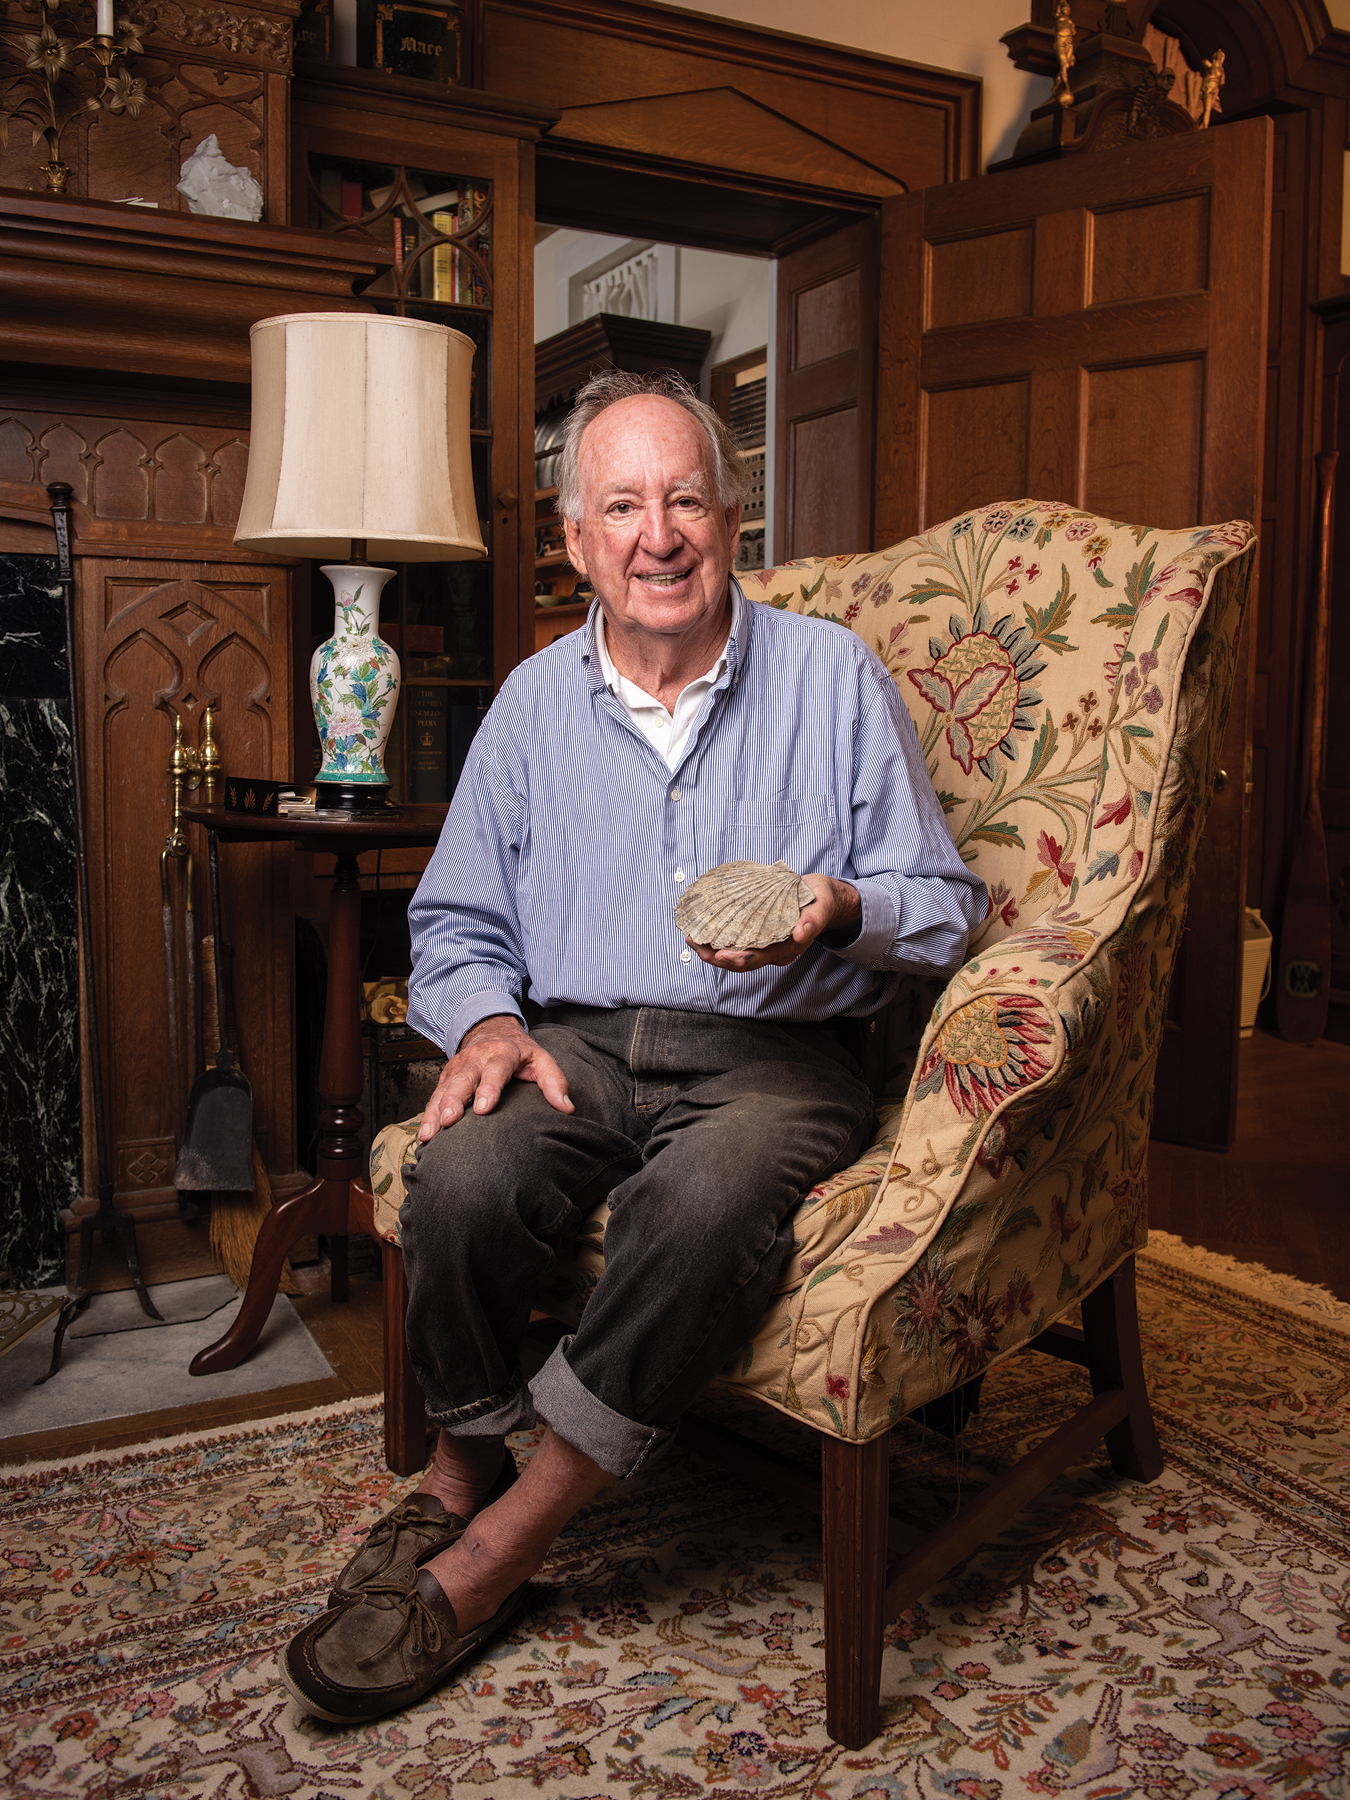 Associate Professor Emeritus of Geology Peter Stifel at the historic Hope House in Talbot County, Maryland. He is casually dressed, sitting in a chair with detailed upholstery in a room decorated with carved wooden panels, a lamp, and an elaborate rug. He is holding a large fossil clamshell.